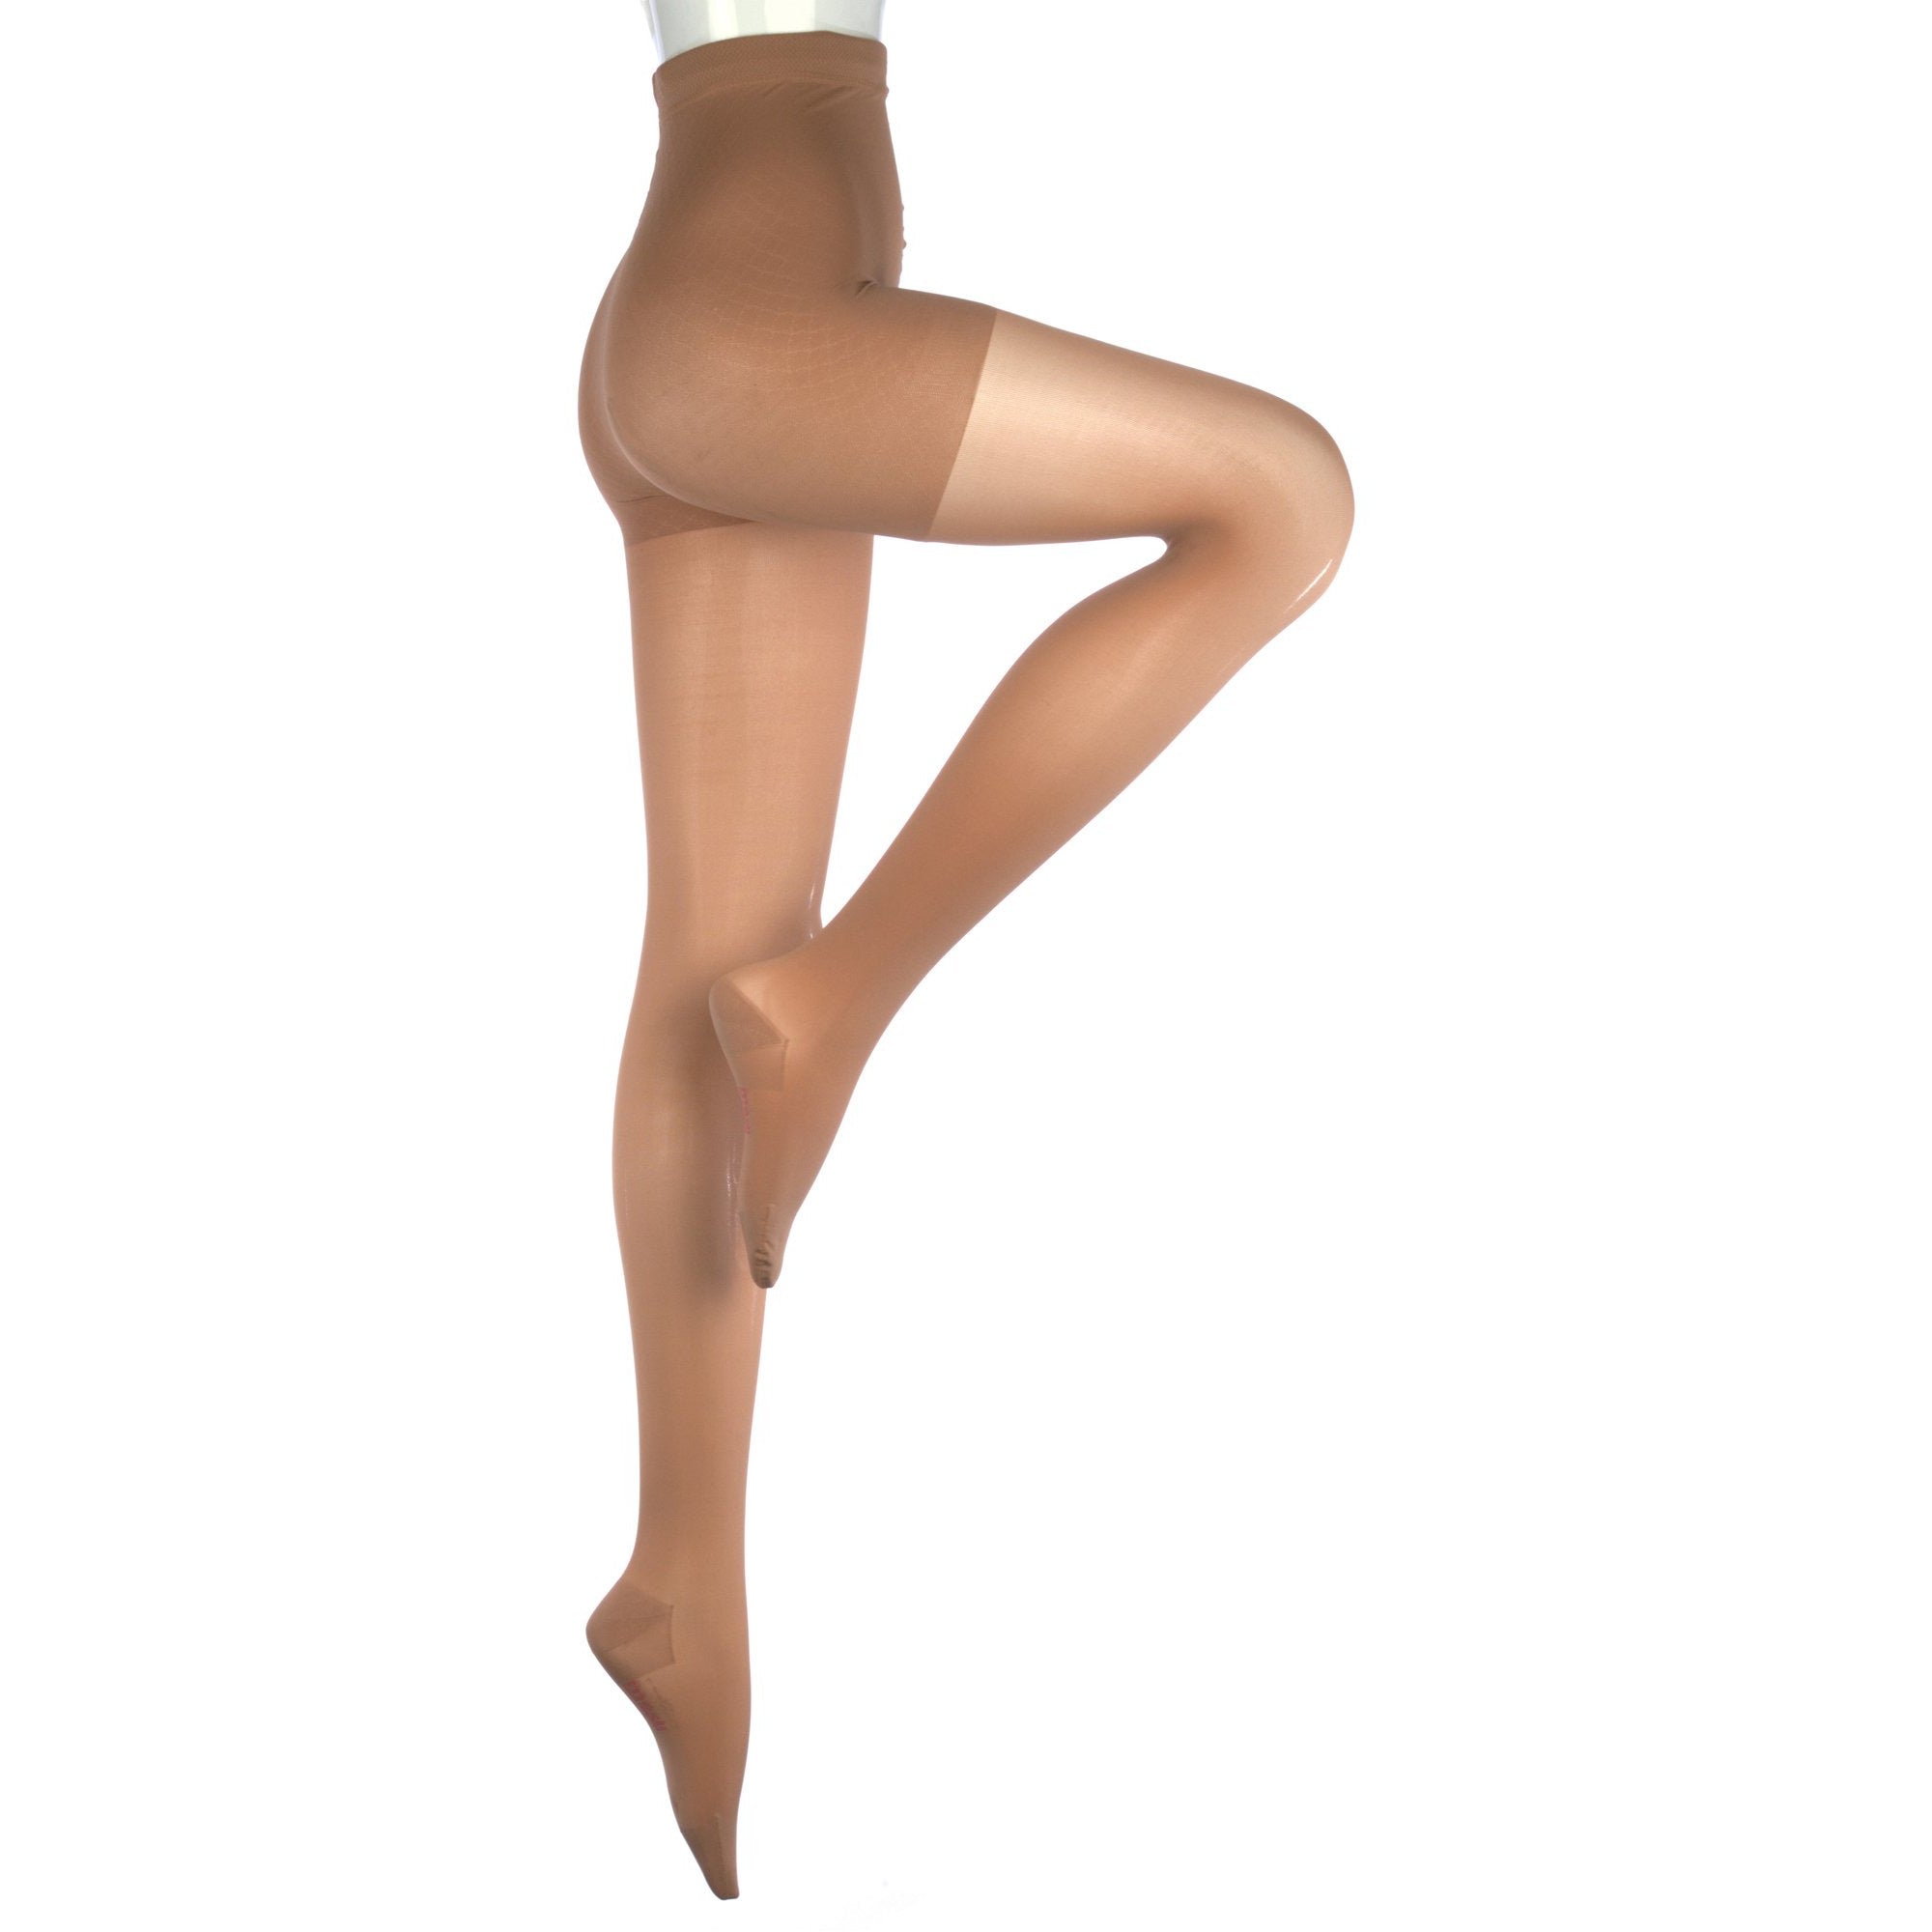 Medi Mediven Sheer and Soft Thigh-High Compression Stocking